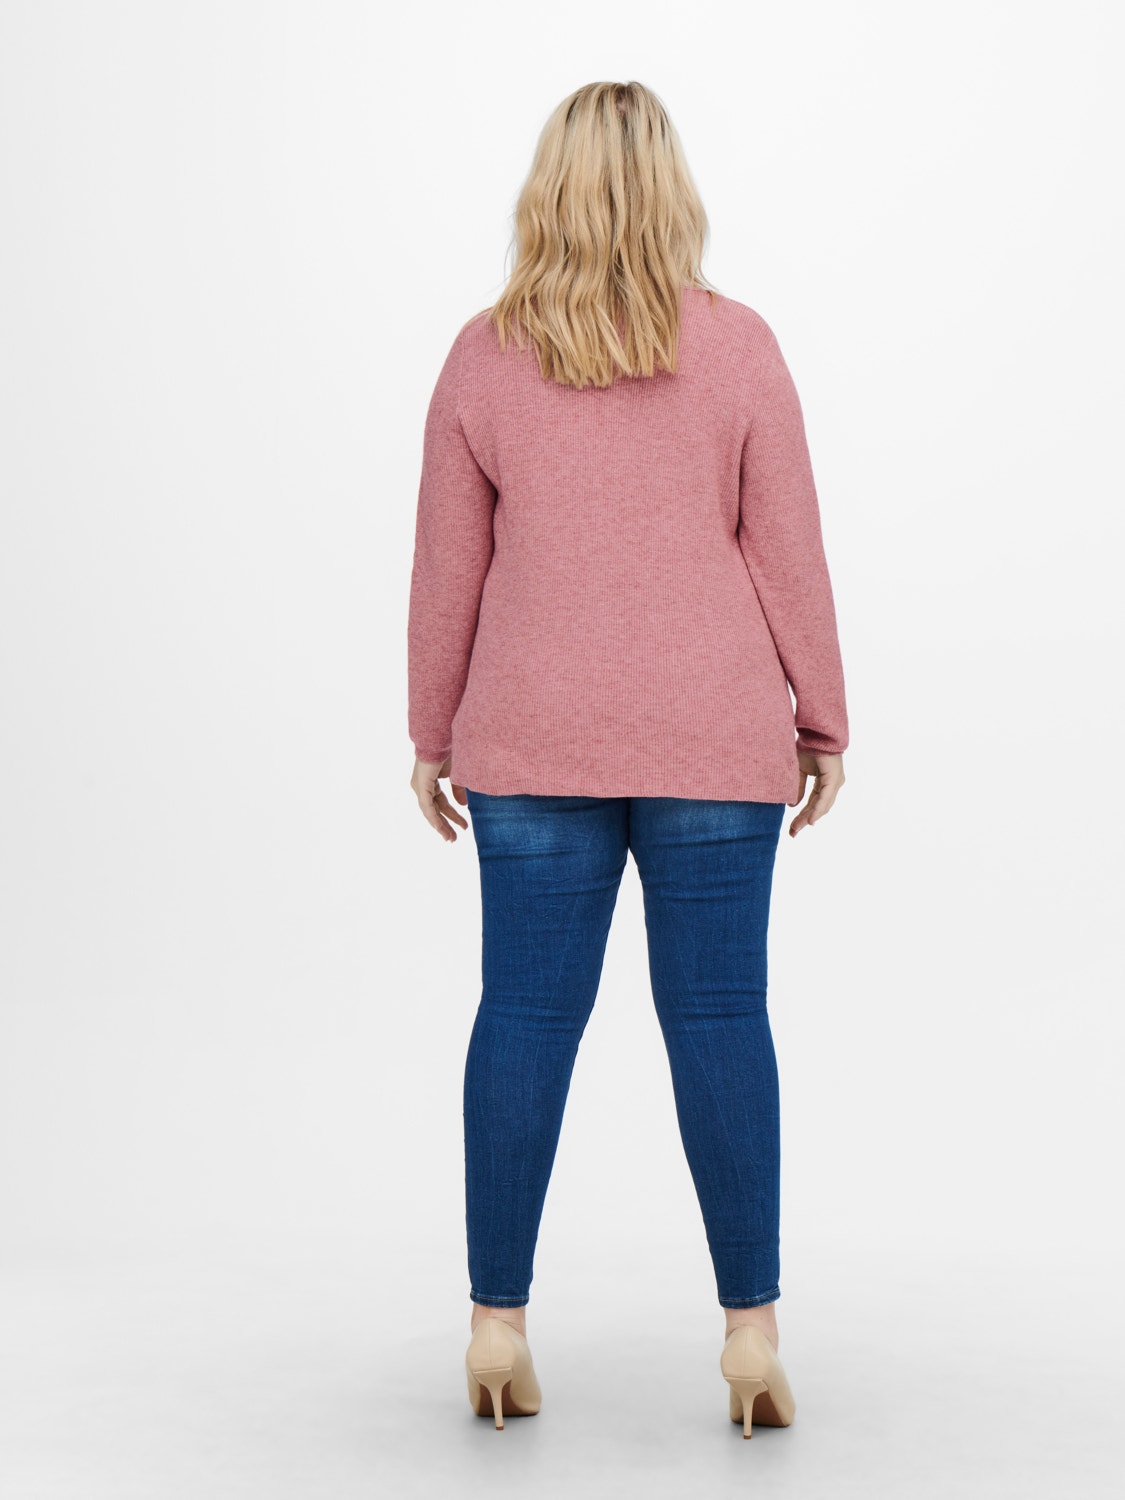 ONLY Pullover -Dusty Rose - 15220491